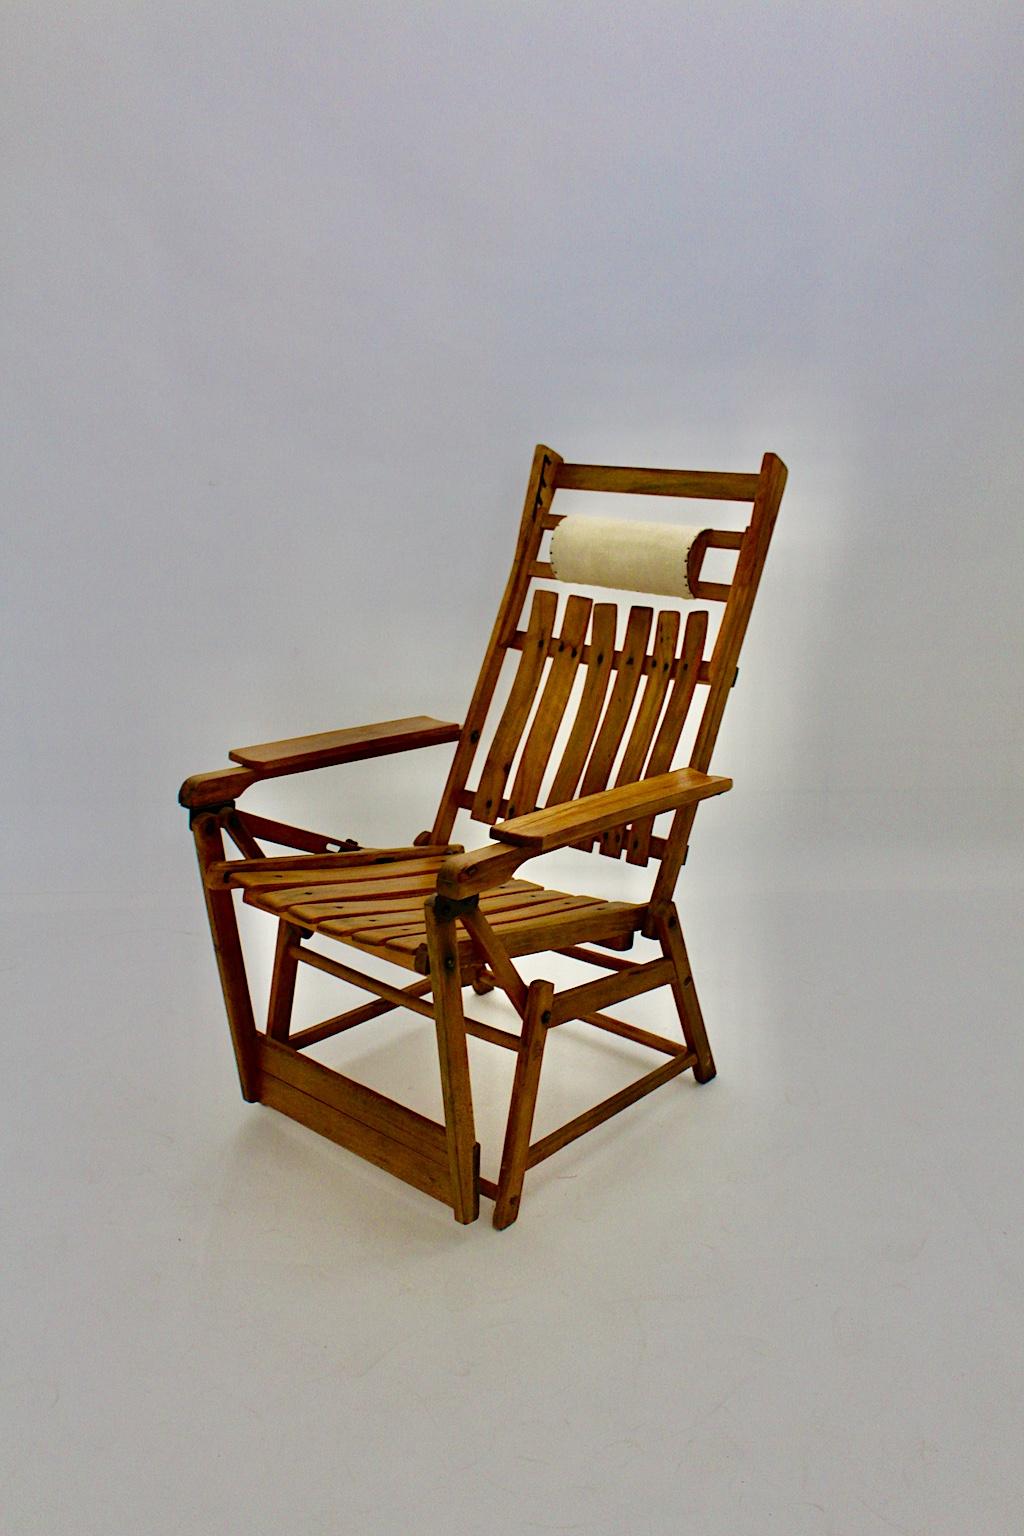 Art Deco vintage beechwood lounge chair or armchair, which was designed by Hans and Wassili Luckhardt 1934-1936 for Gebr. Thonet Frankenberg / Eder.
This oiled beechwood construction shows design features like an adjustable backrest into 4